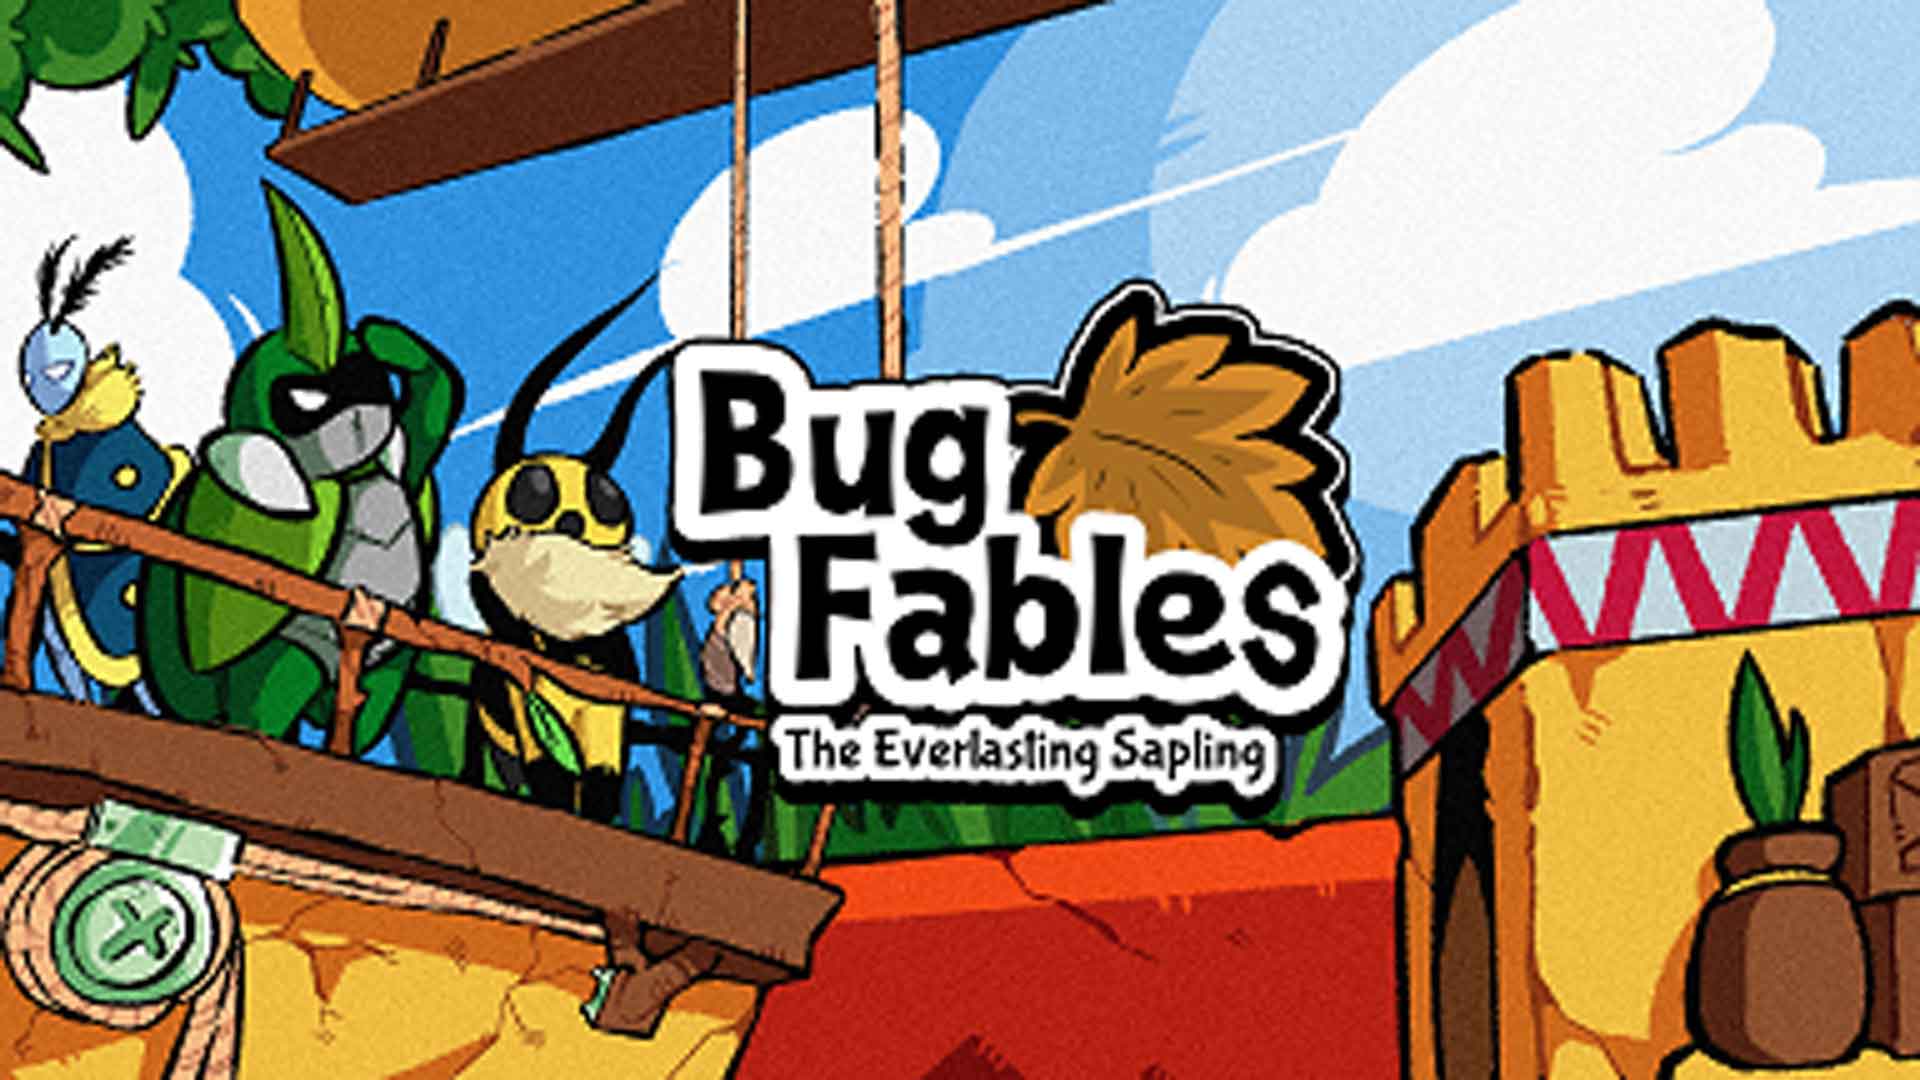 Bug Fables -The Everlasting Sapling- instaling